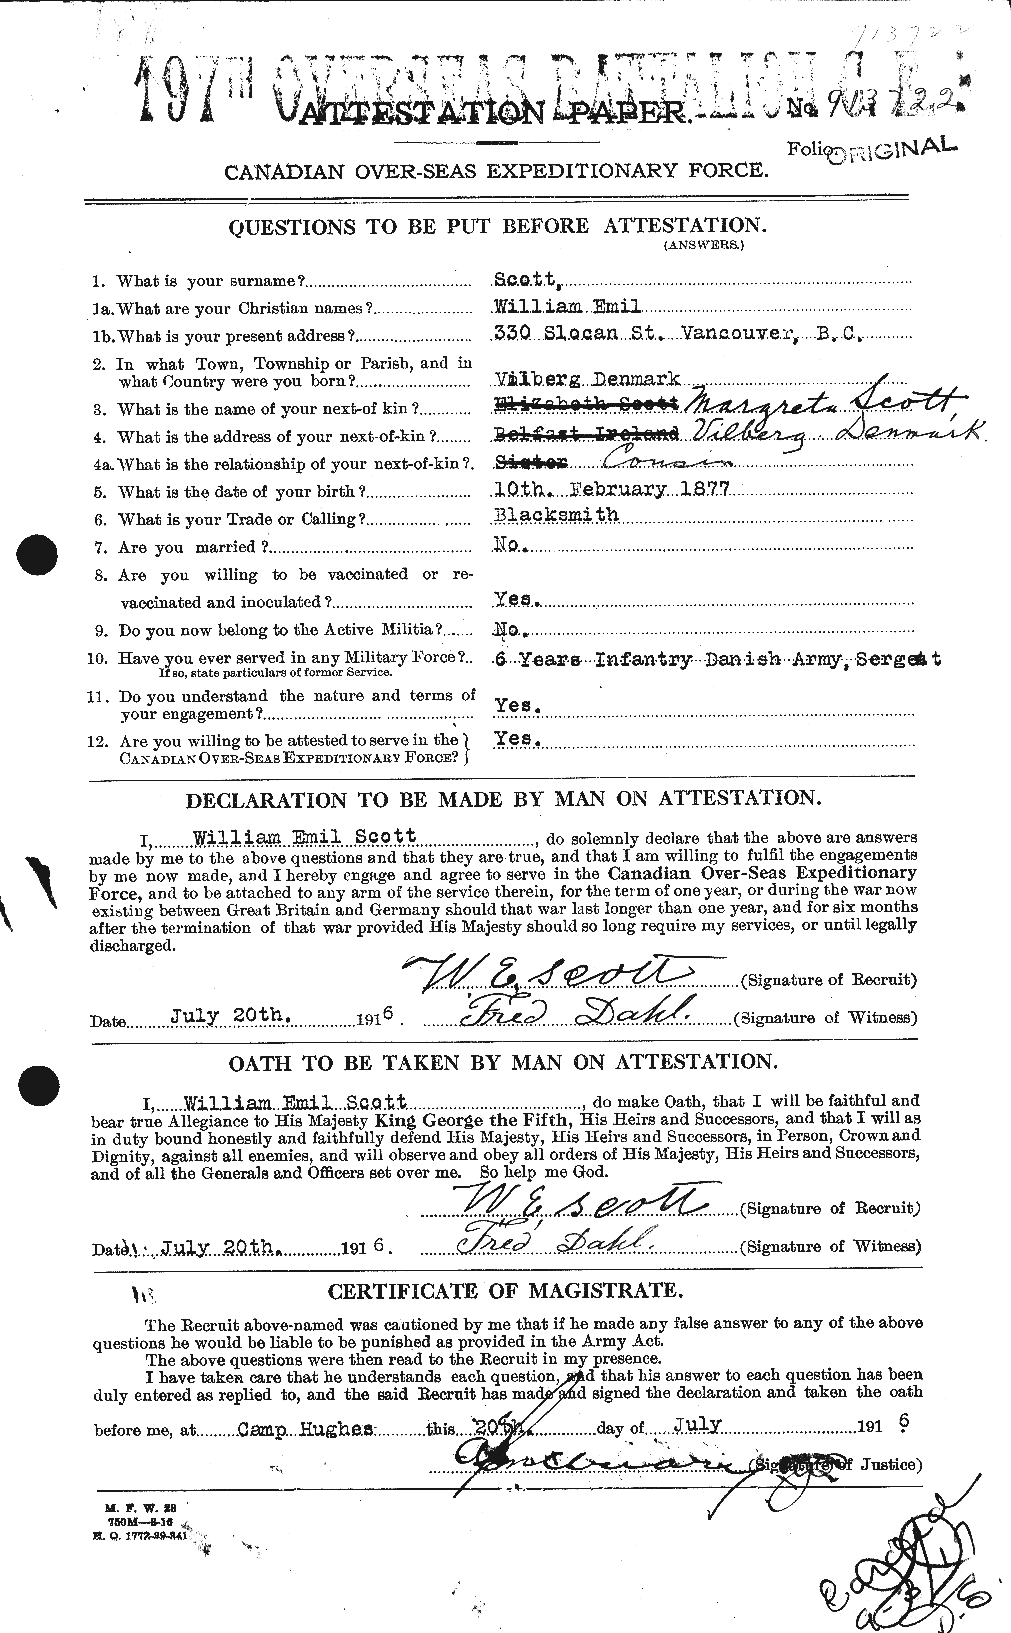 Personnel Records of the First World War - CEF 087026a